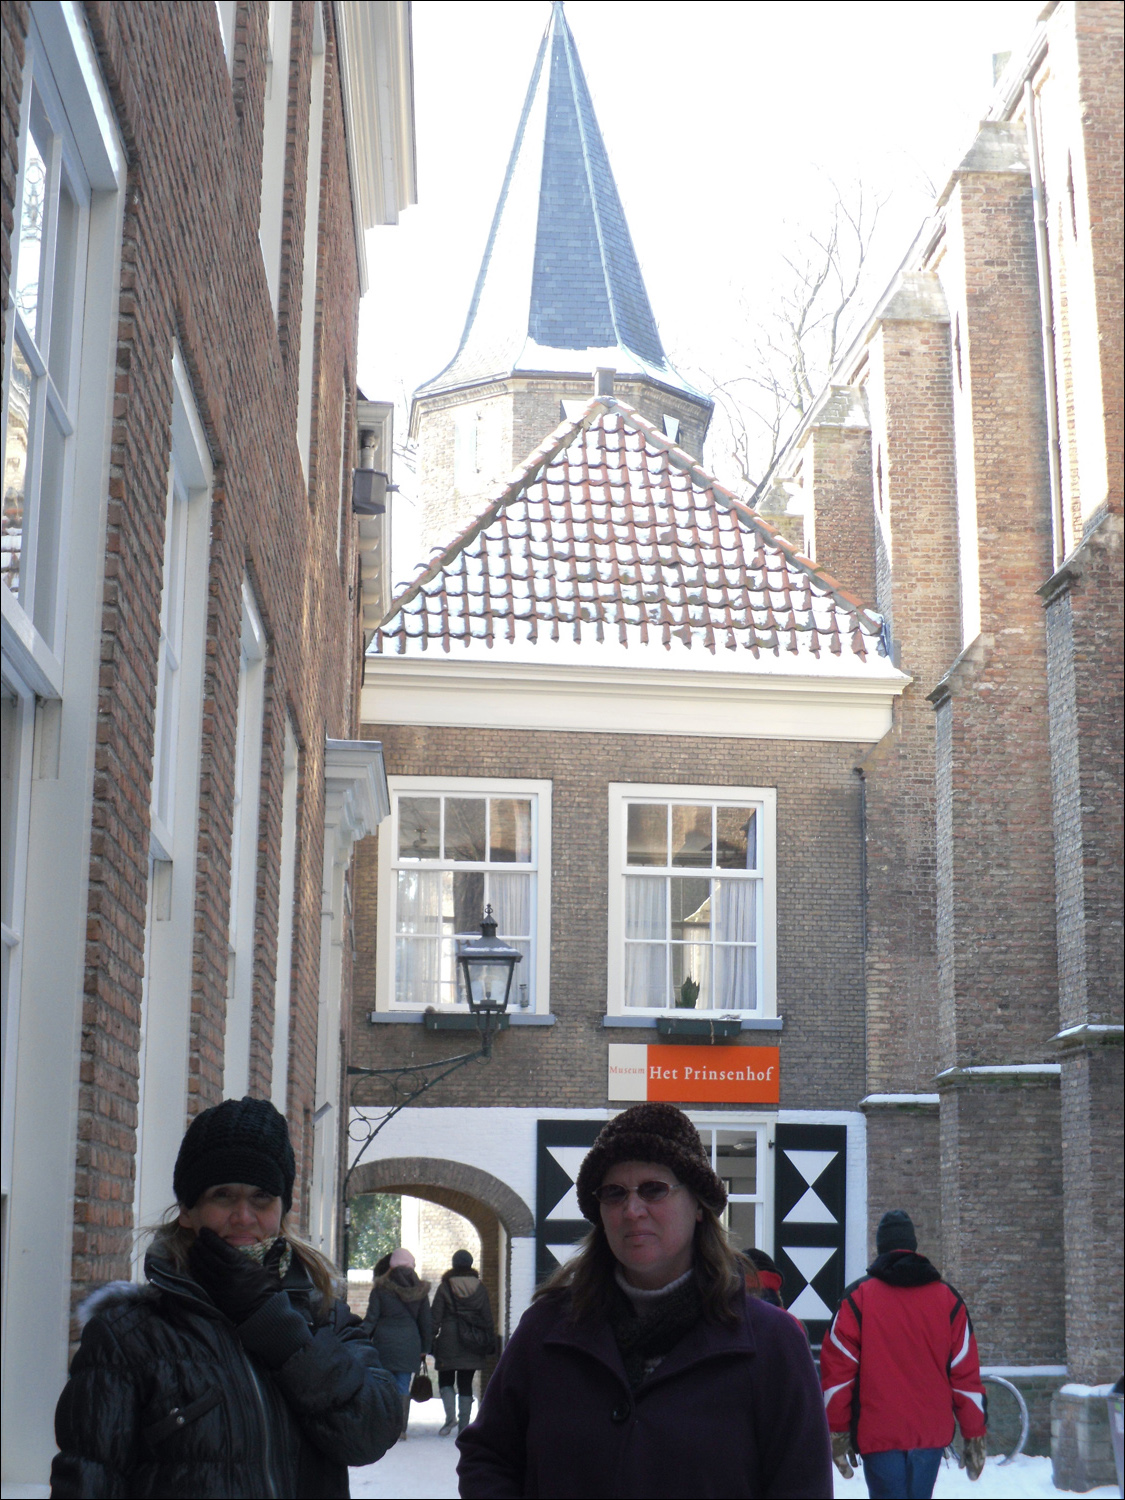 L-R Debbie and Sondra on our way to visit Prinsenhof museum